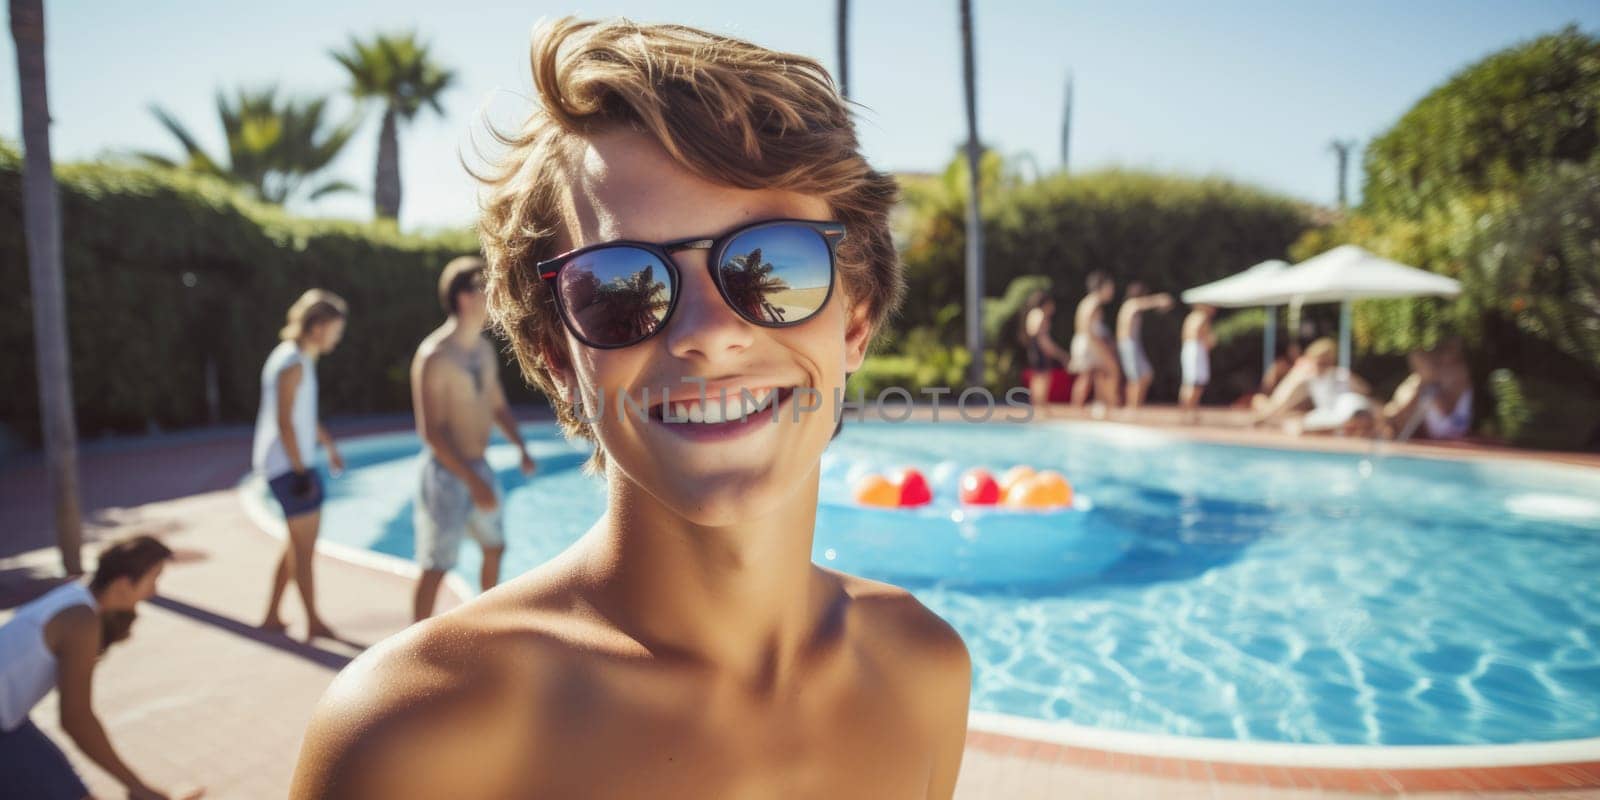 Celebrating christmas and new year in hot countries. portrait of a happy teen boy in santa hat celebrating christmas in pool party. AI Generated